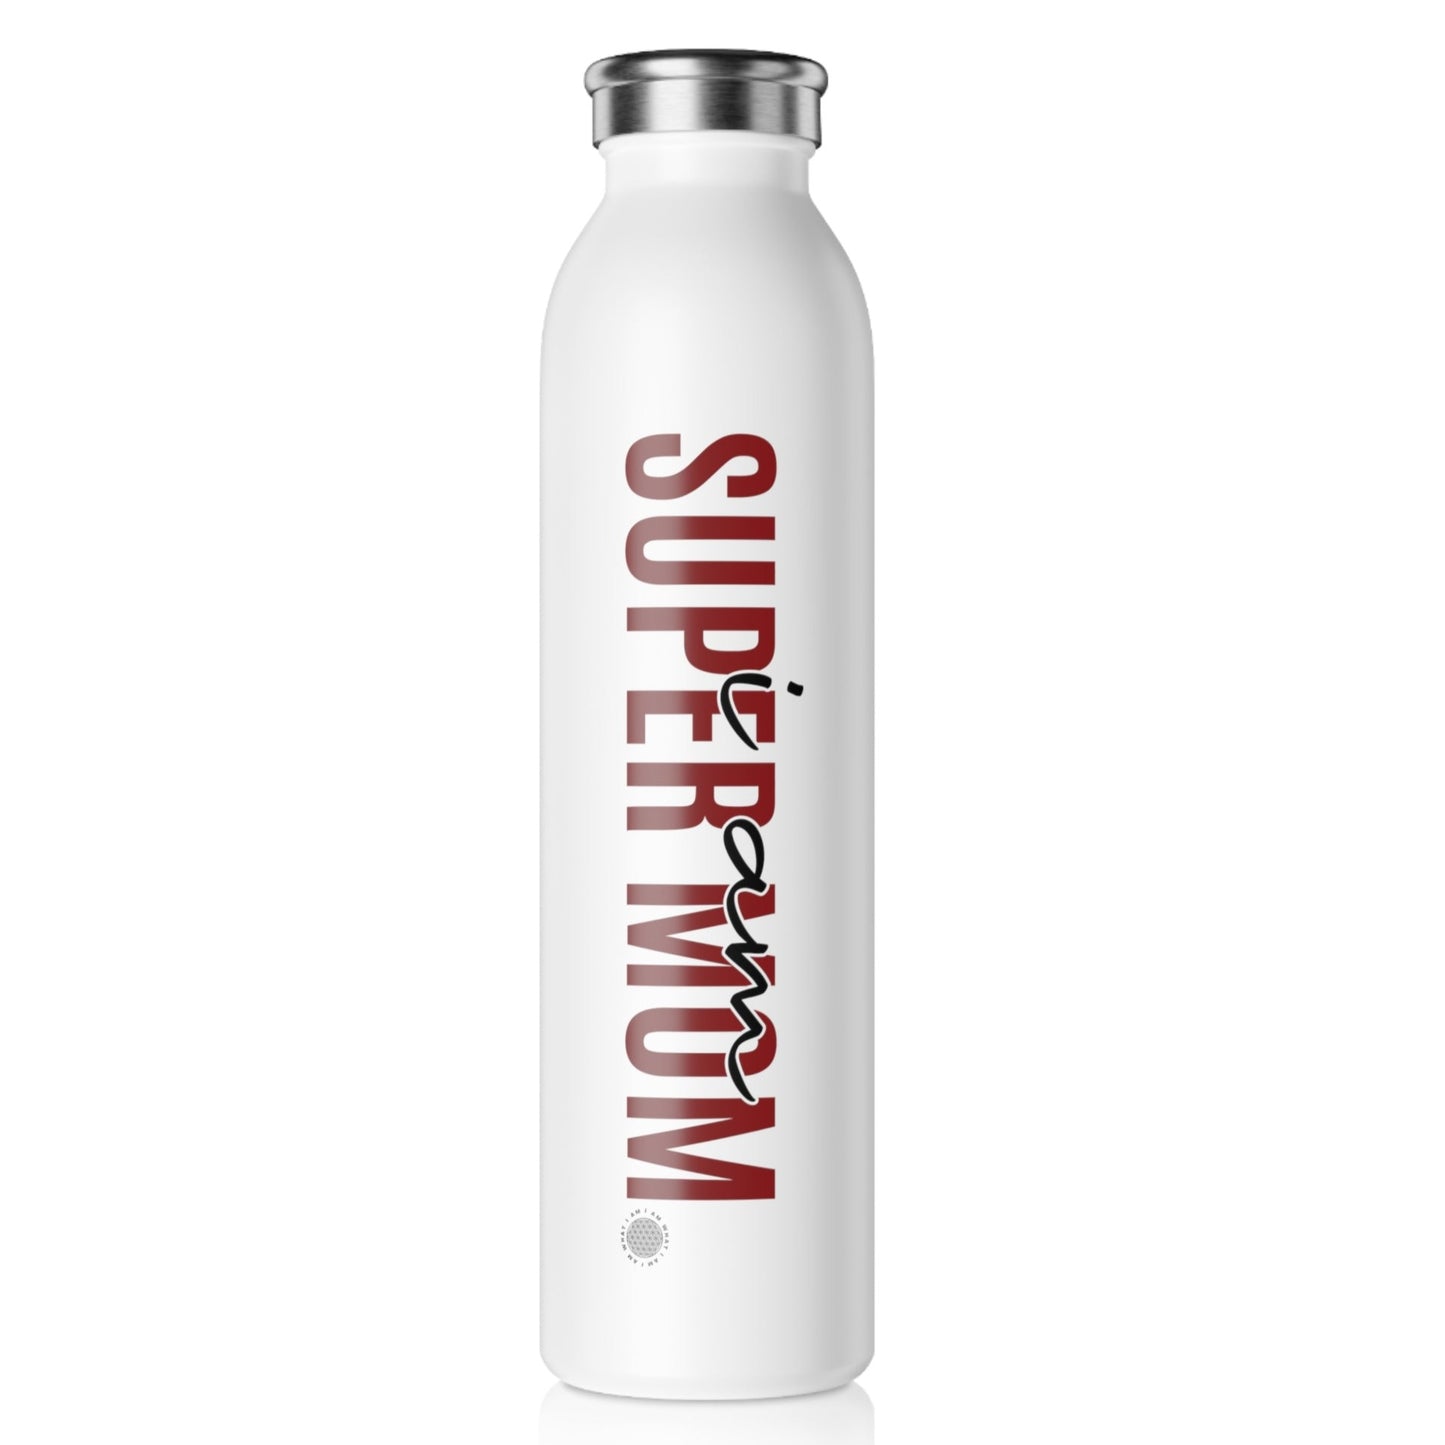 Our 'I Am Super Mom' water bottle is perfect for your loving mother who does absolutely everything for you and always on the go. Show her you are grateful.